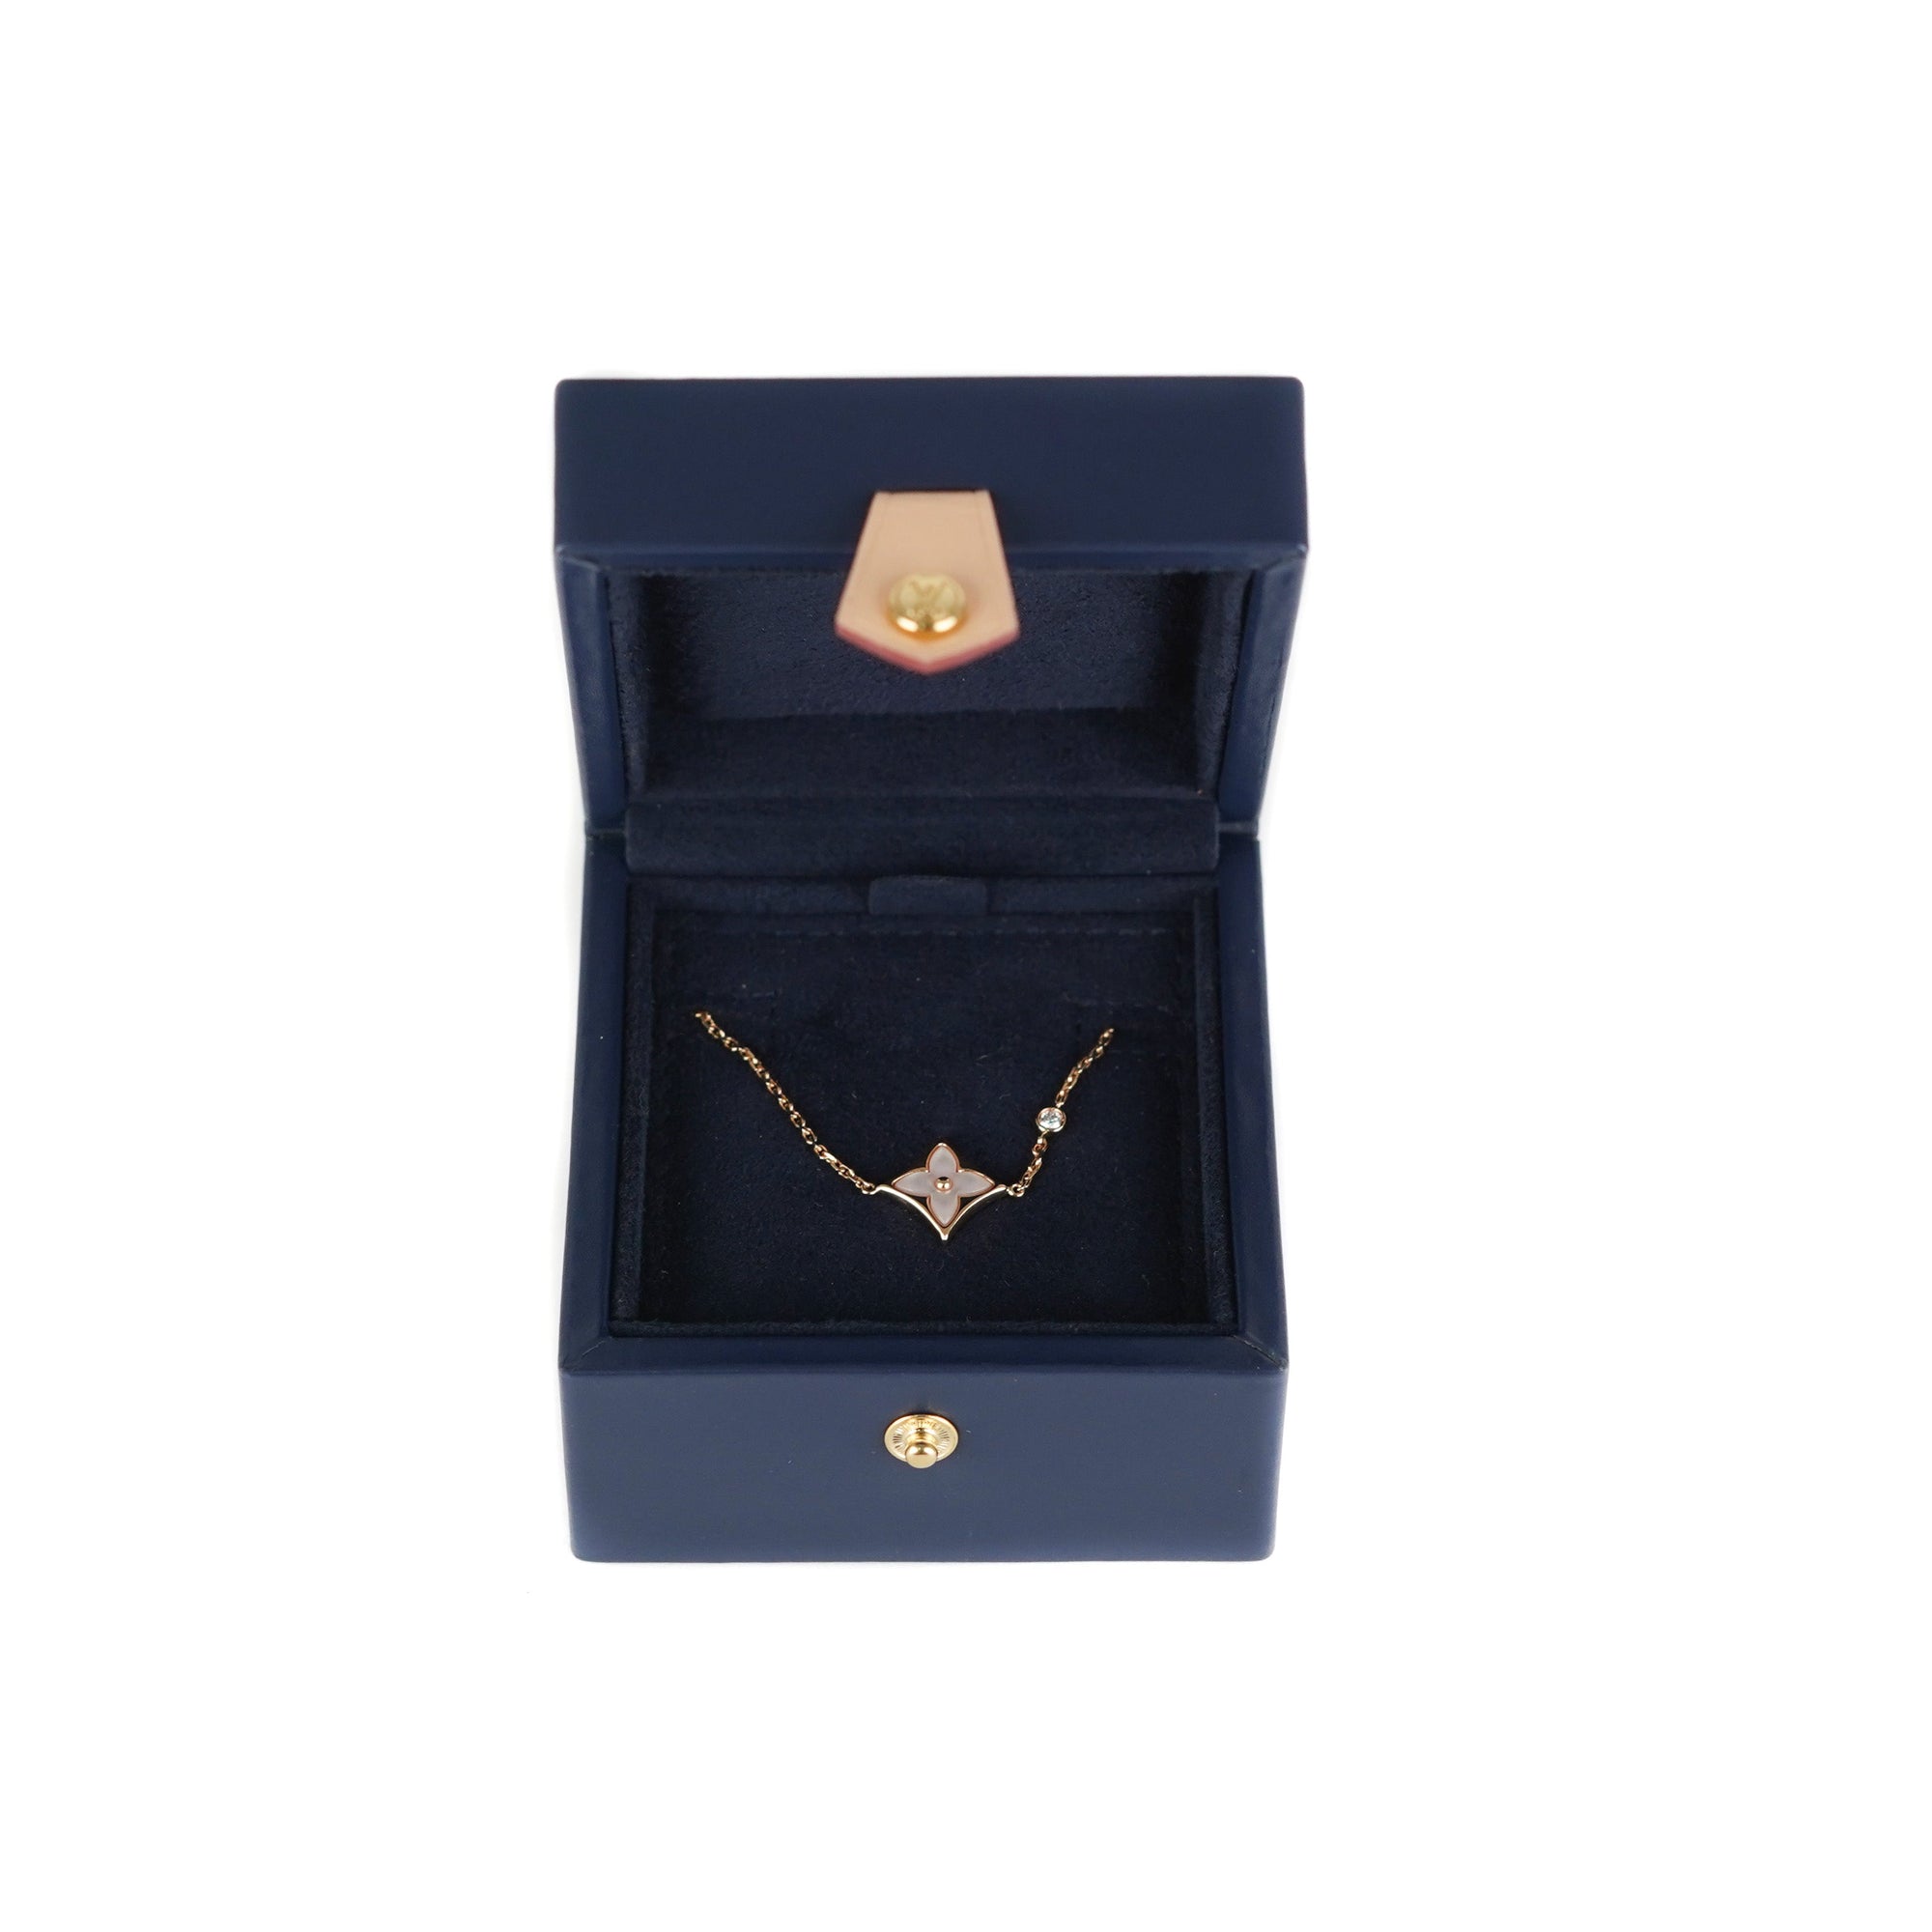 Star Blossom Jewelry - Louis Vuitton Necklace for Women, LOUIS VUITTON ®